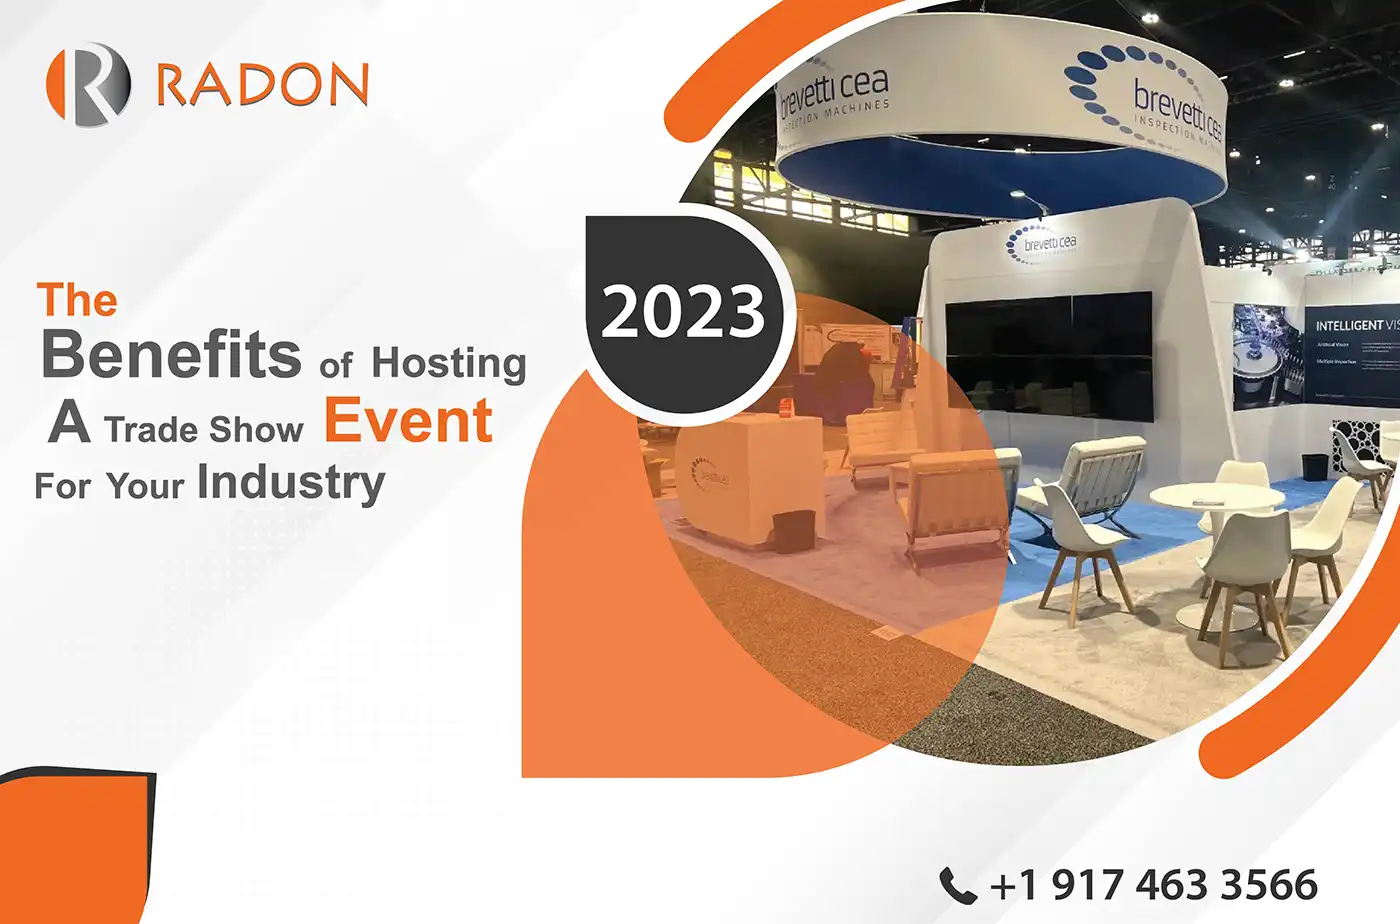 The benefits of hosting a trade show event for your industry